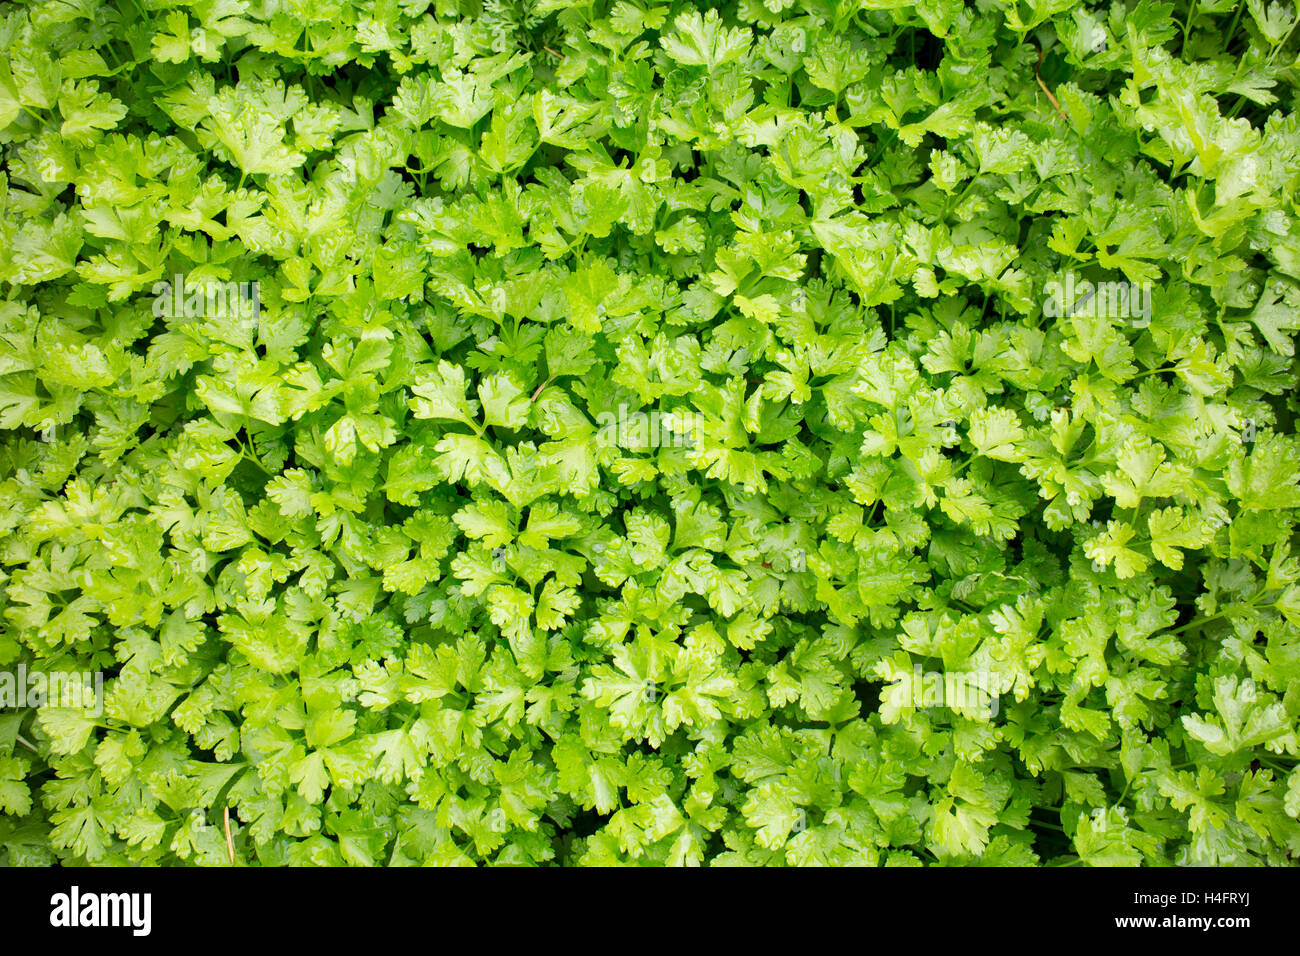 Green plant food growing in a tray to be transplanted out in soil, farm inspired Stock Photo